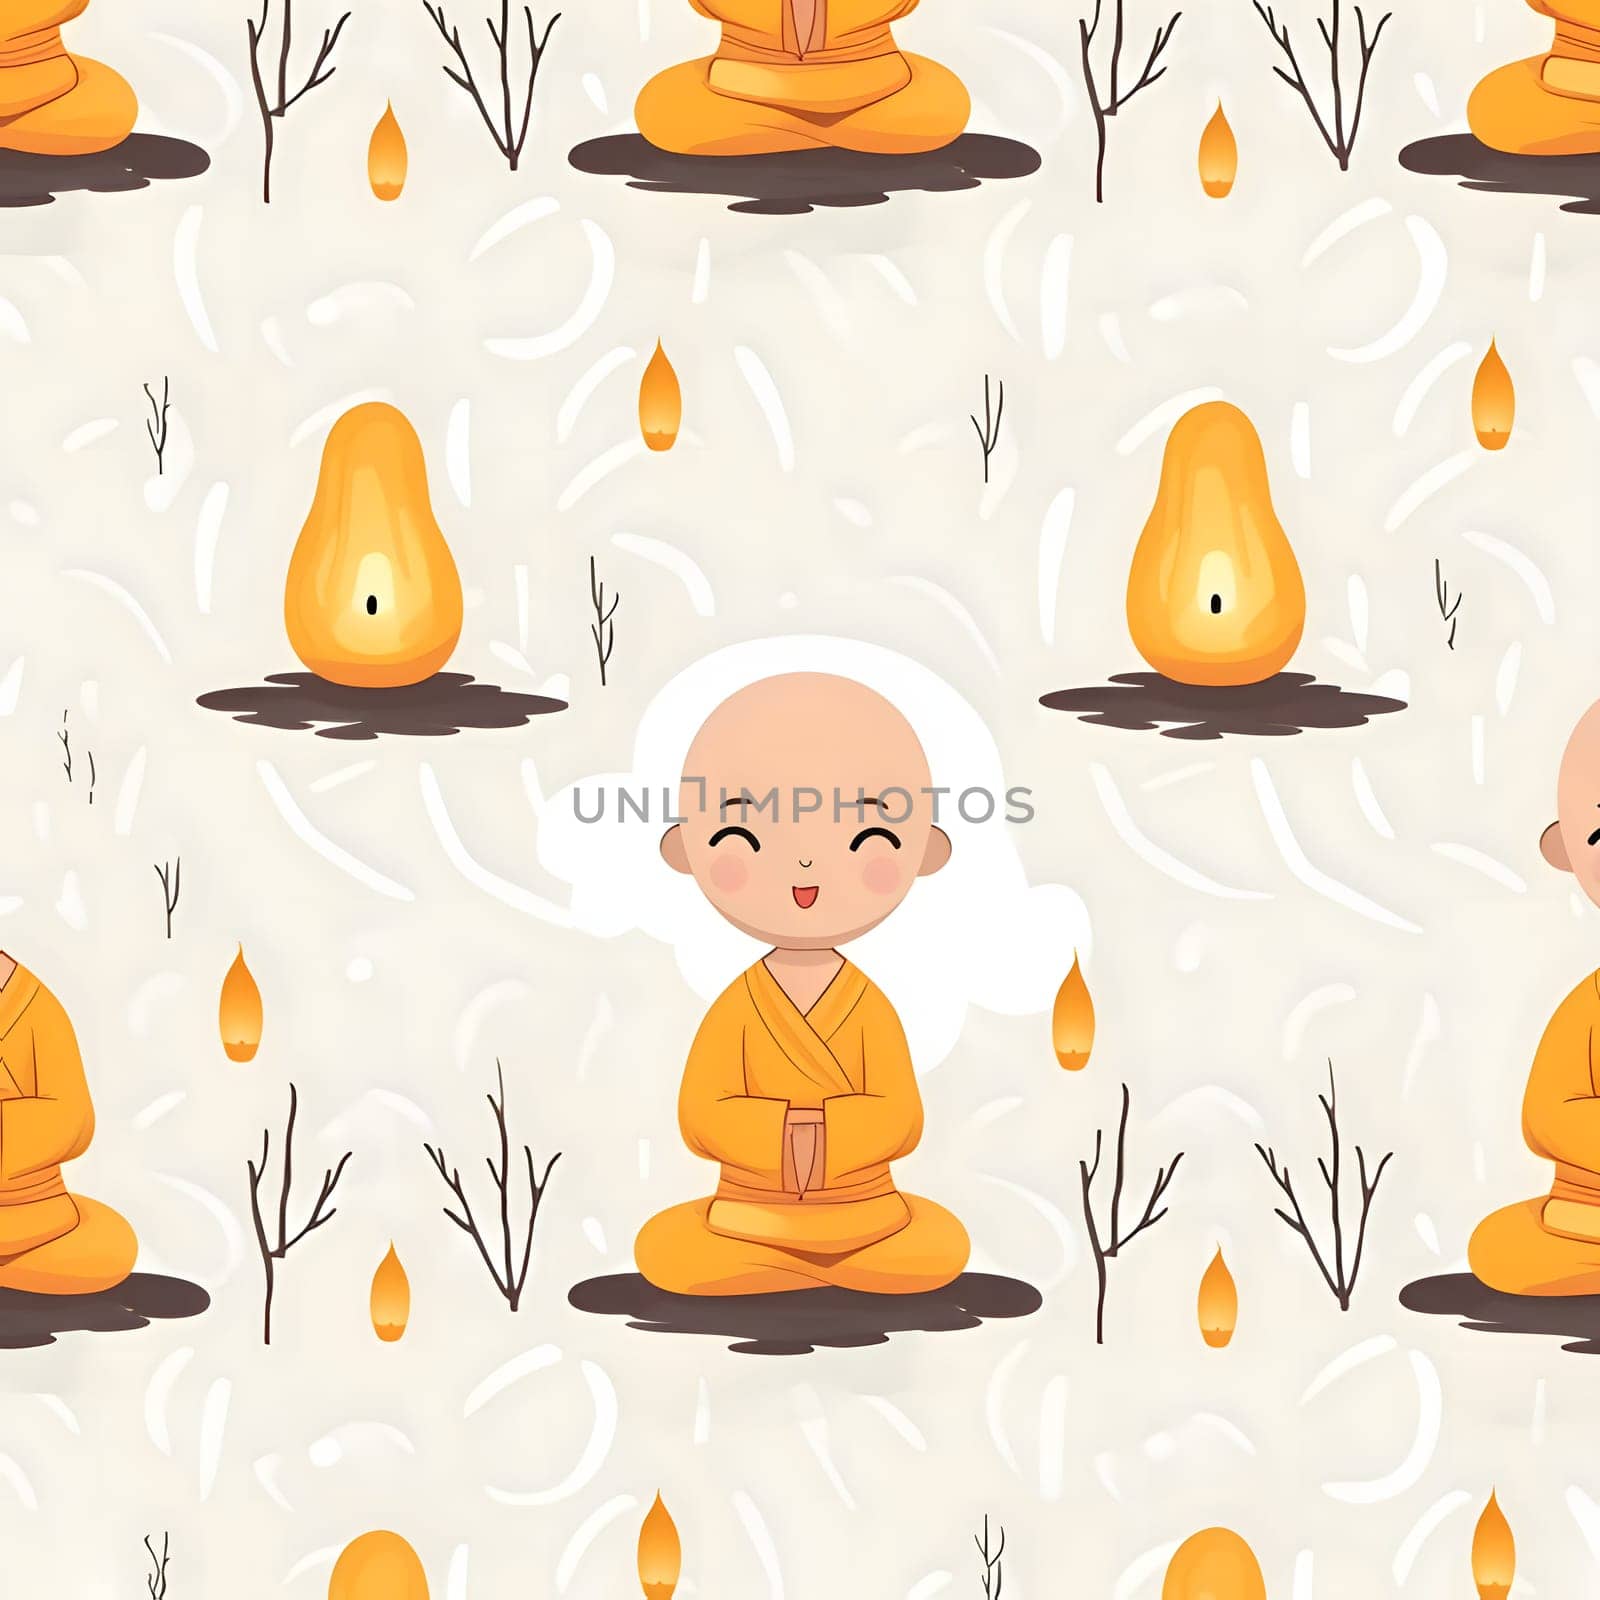 Patterns and banners backgrounds: Seamless pattern with cute cartoon buddhist monk and candles